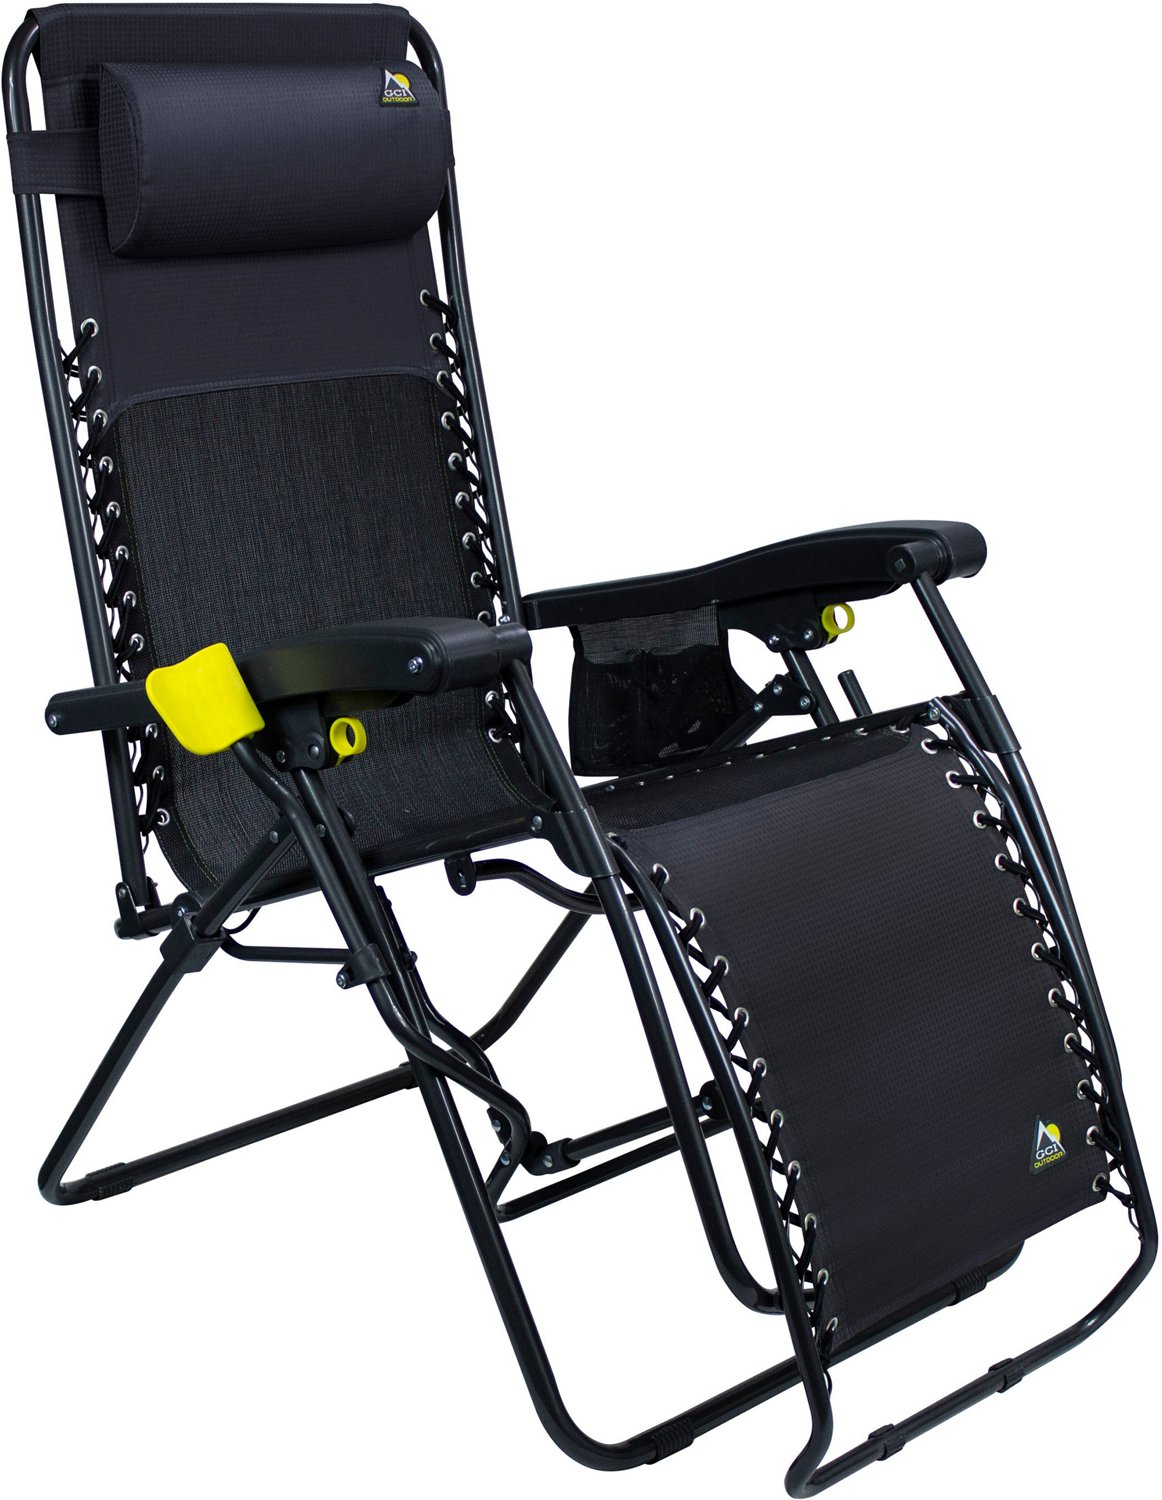 academy sports outdoor rocking chair